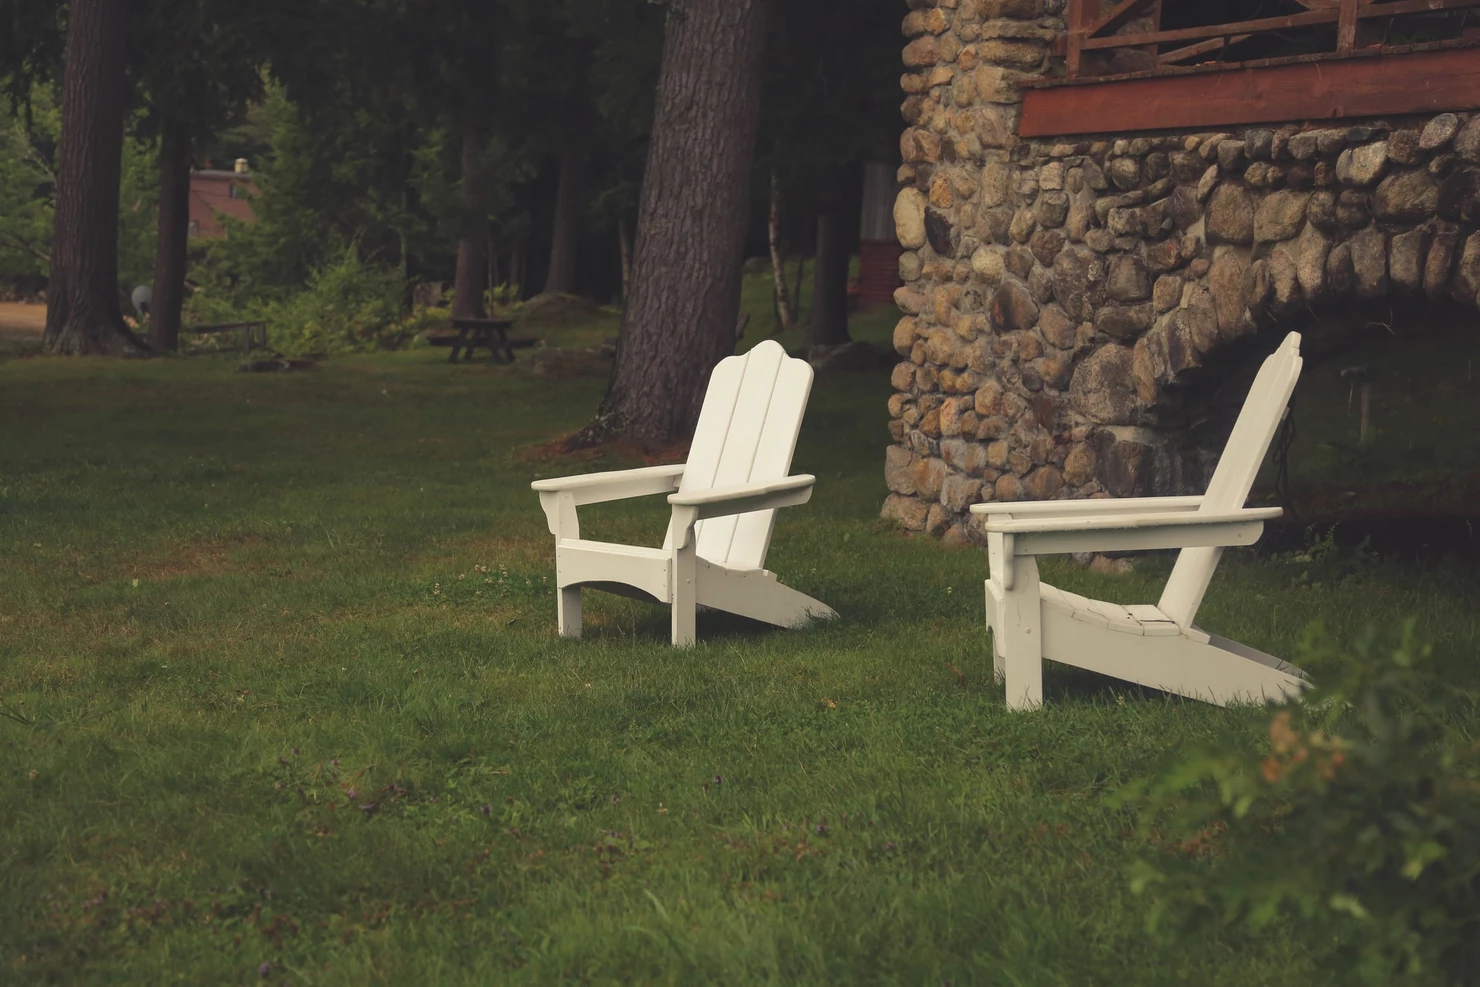 Two white Adirondack chairs on a lawn near a stone wall and picnic area